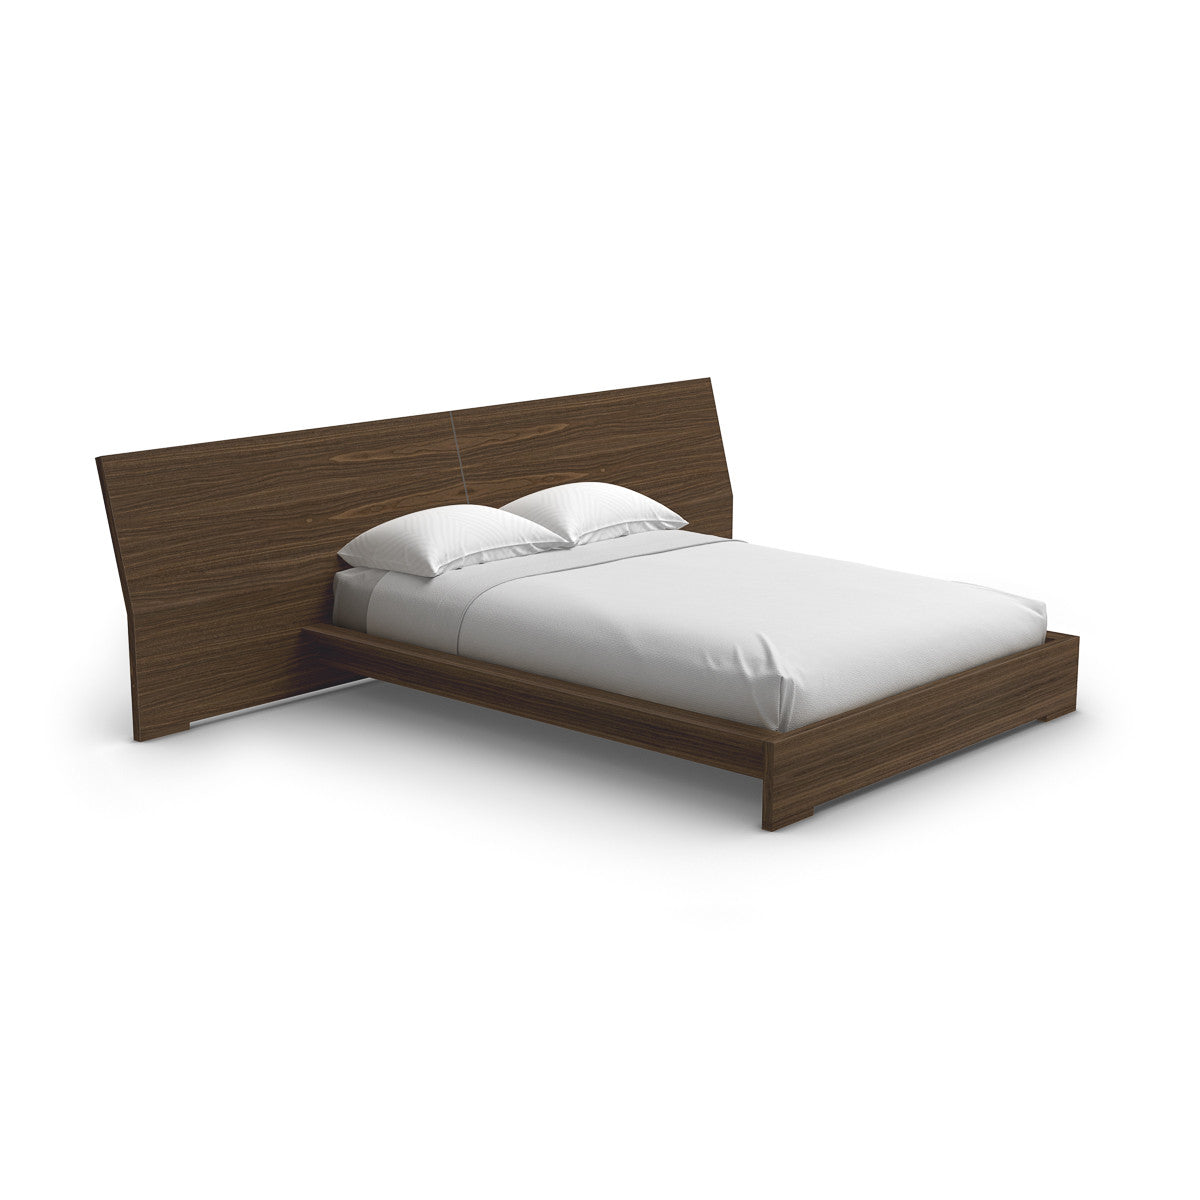 Picture of Sonoma Bed - Queen - Wide Headboard